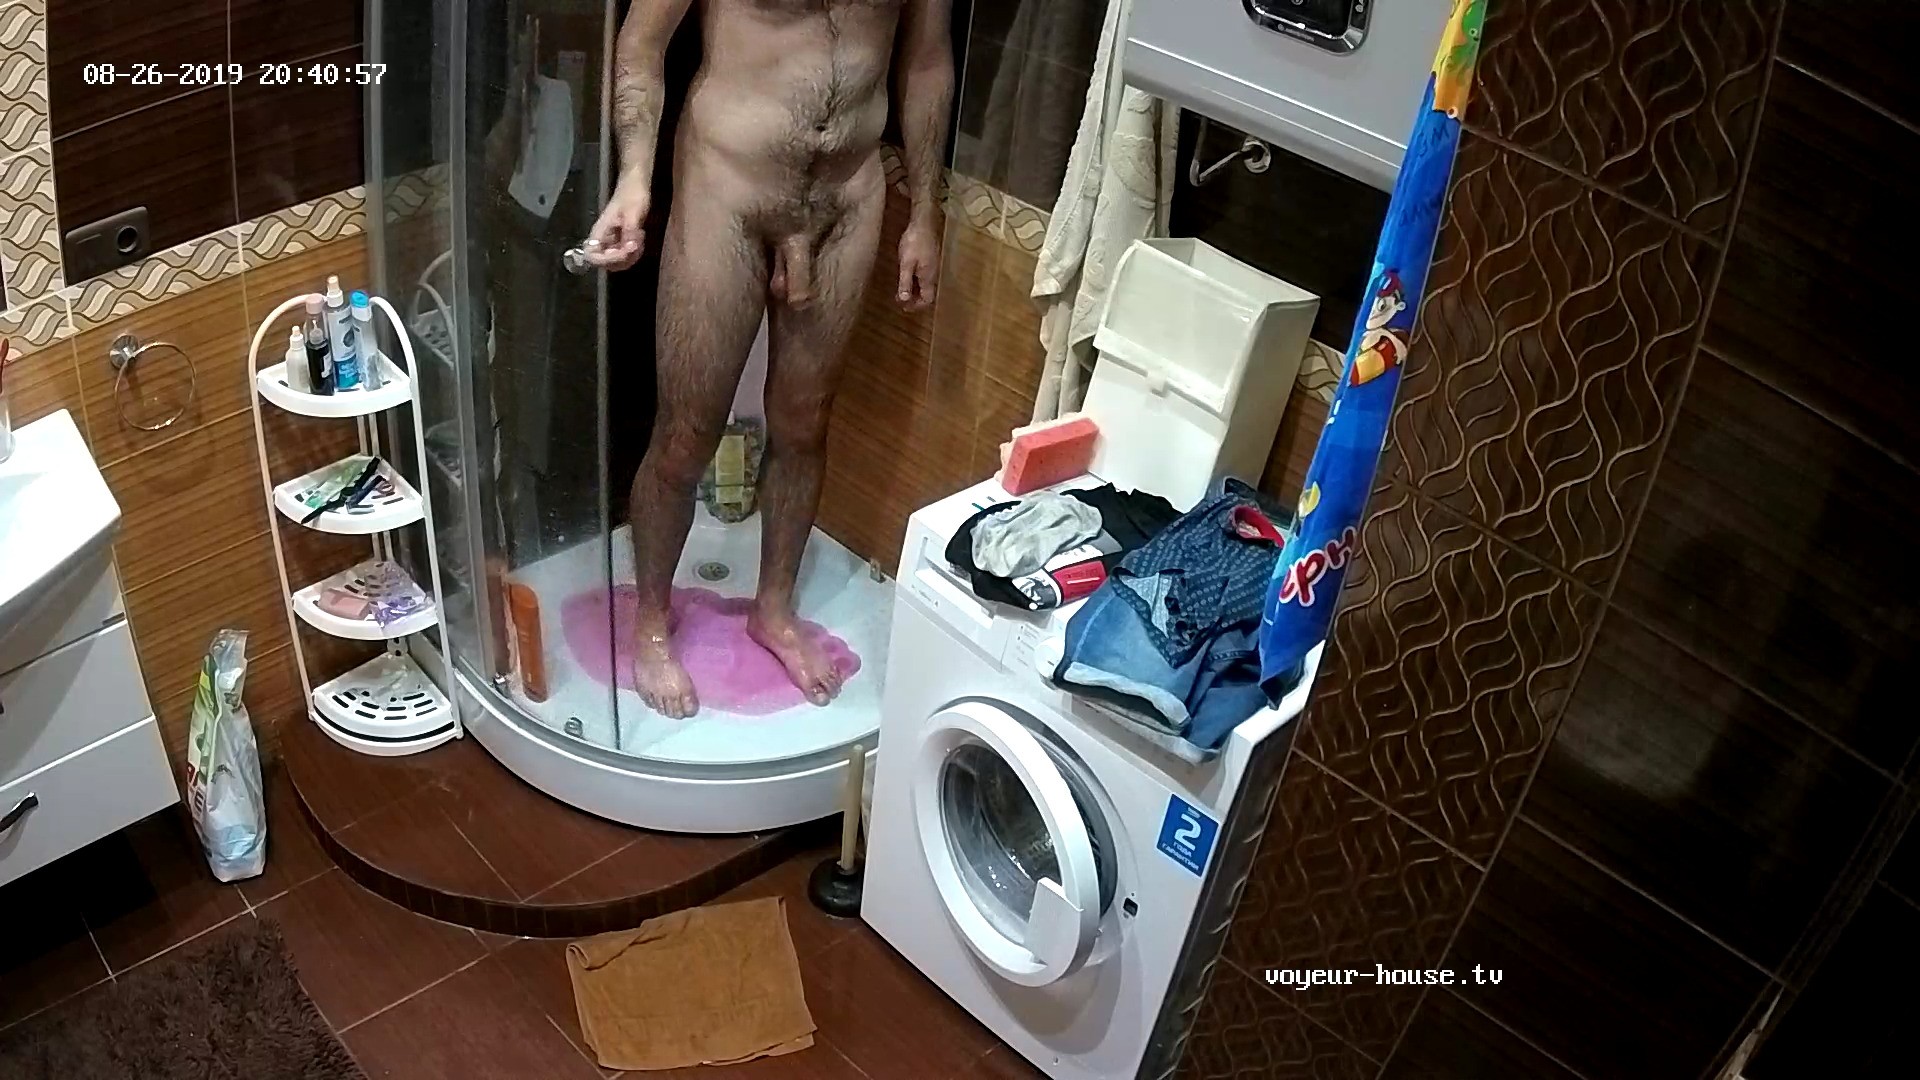 Guest Guy Evening Shower 26 Aug 2019